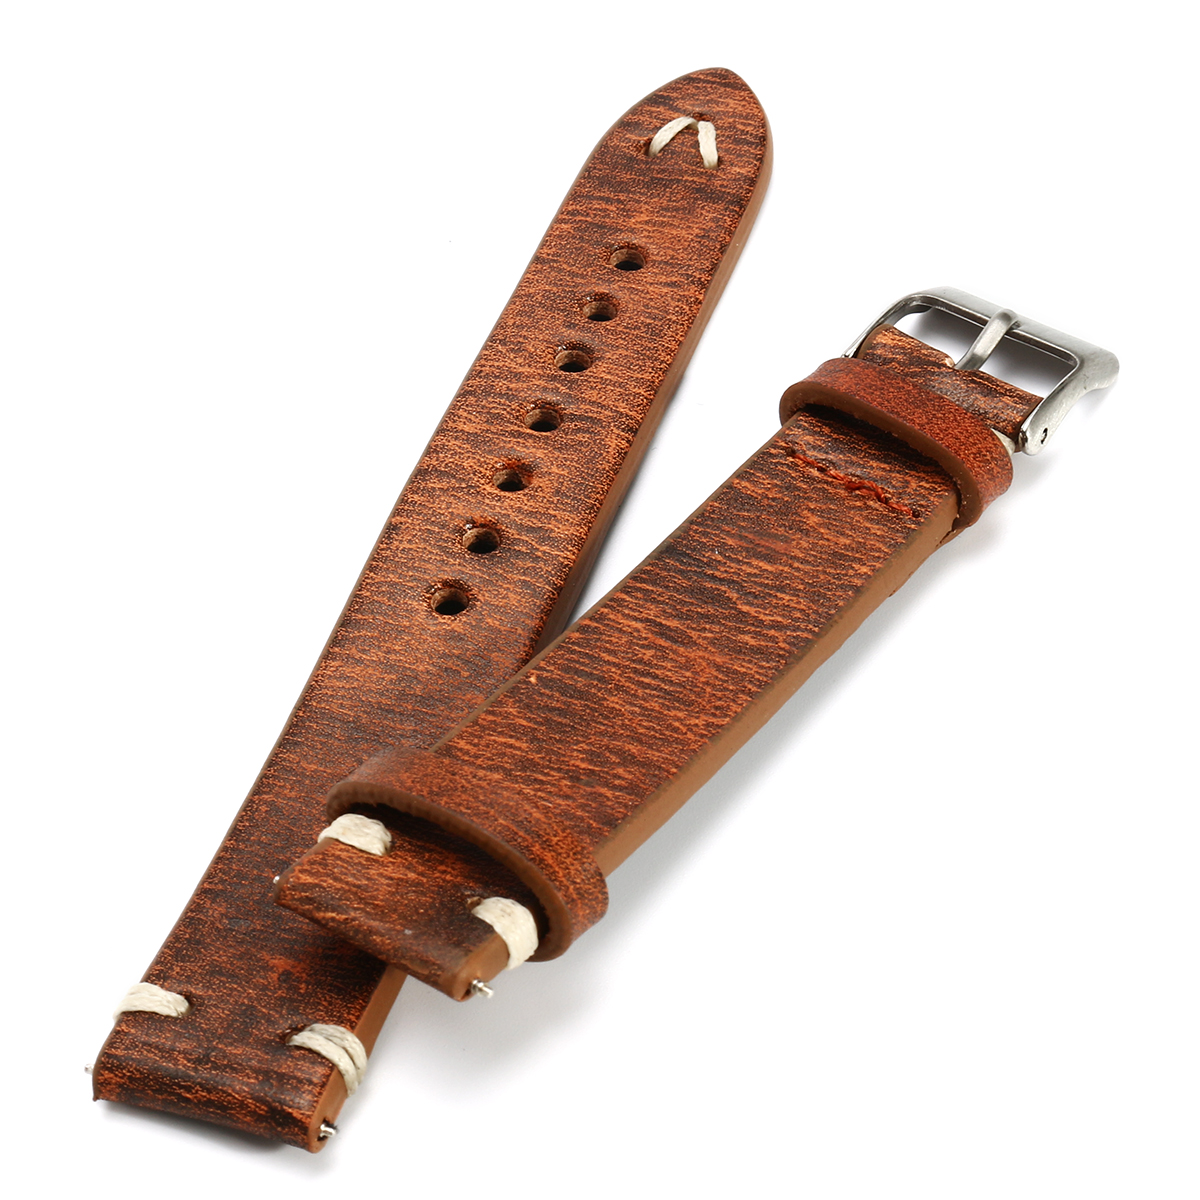 Find Straps Vintage Style Distressed Leather Wome/Men Watch Band Strap with Stitching for Sale on Gipsybee.com with cryptocurrencies